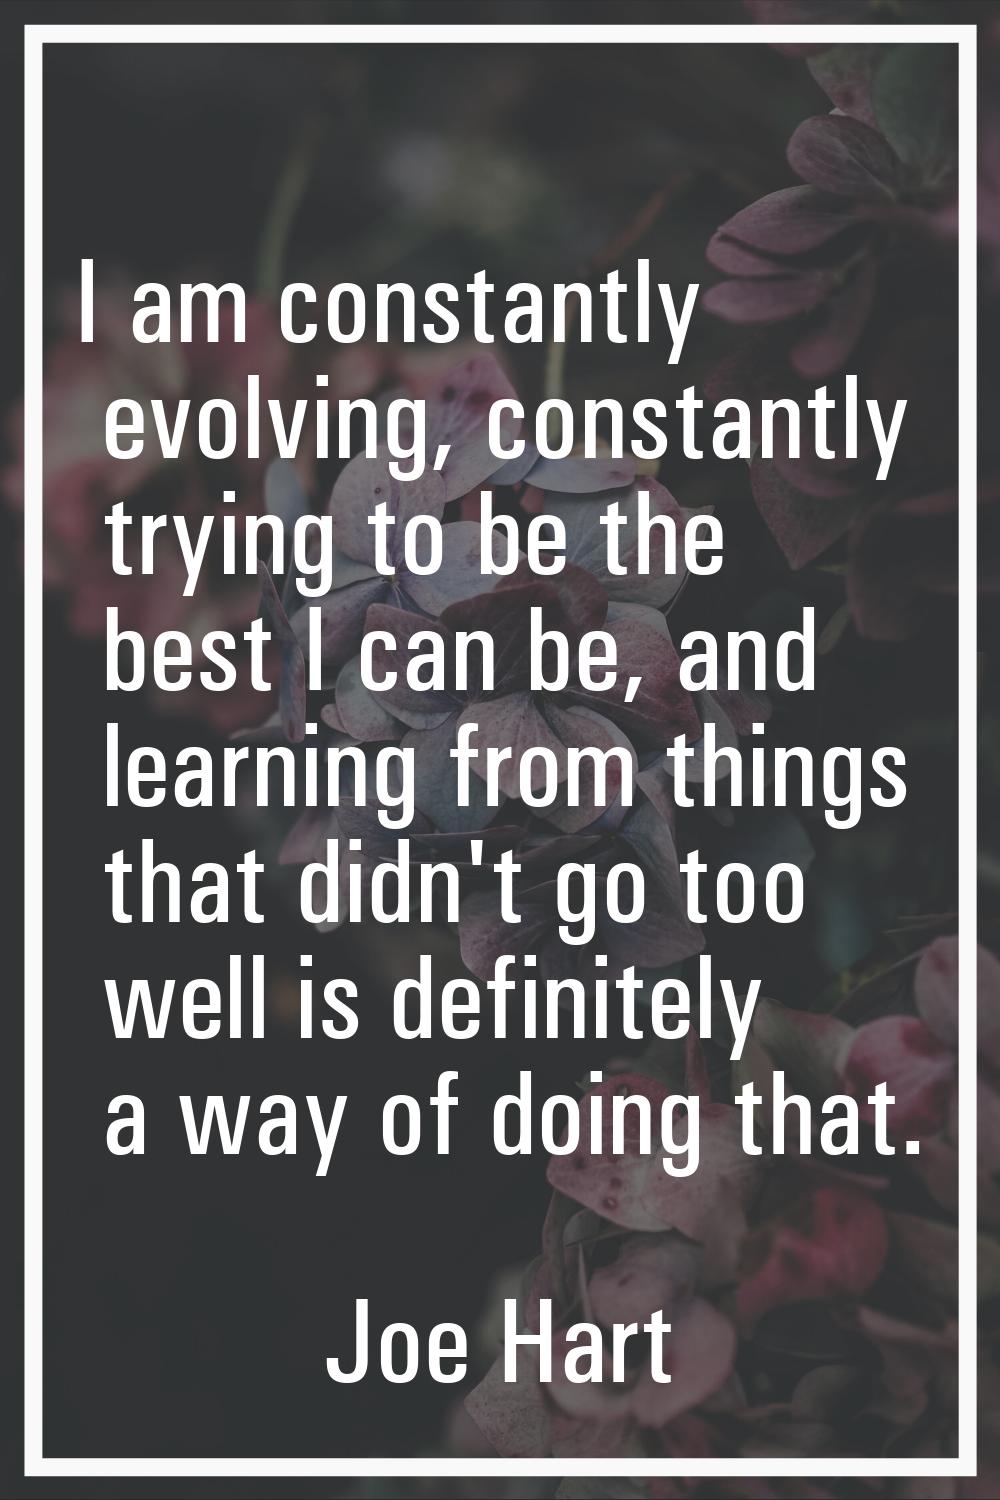 I am constantly evolving, constantly trying to be the best I can be, and learning from things that 